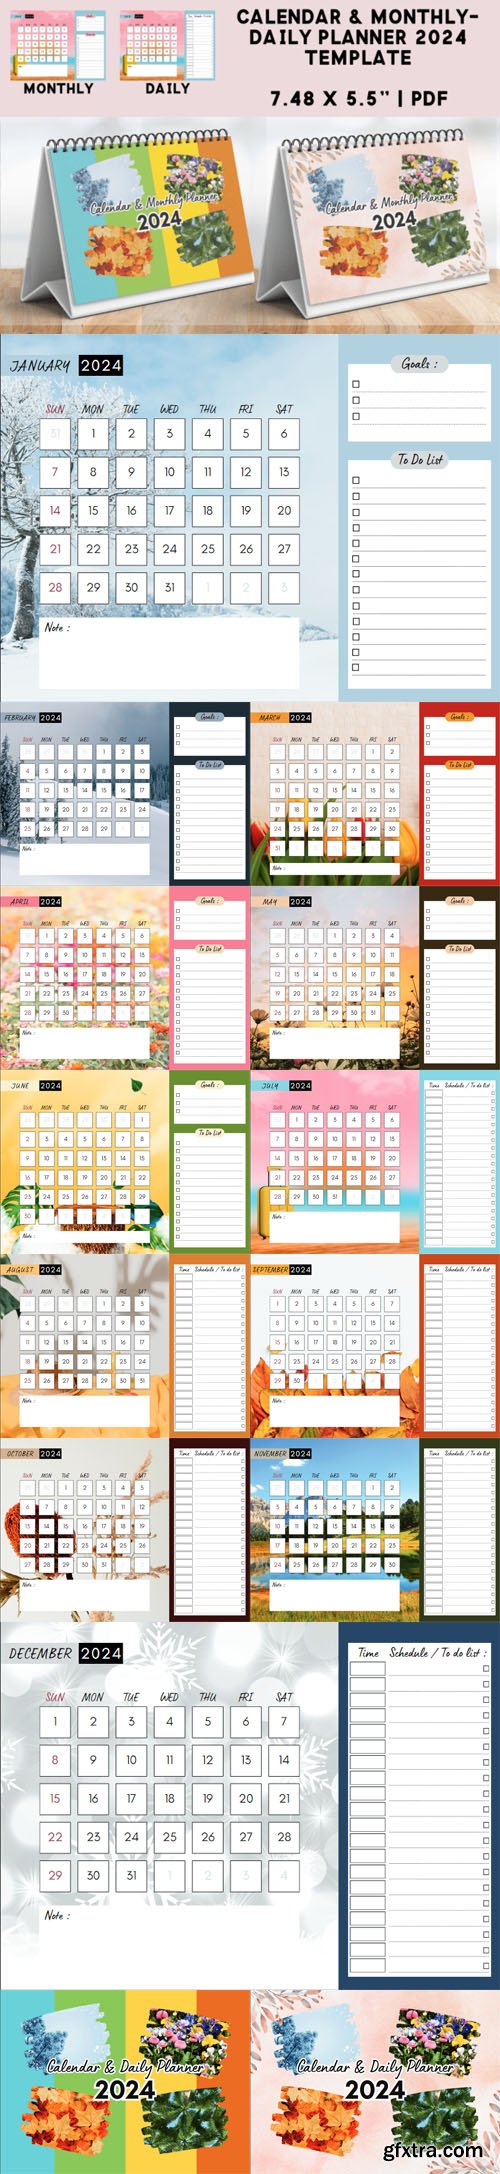 2024 Calendar & Monthly/Daily Planner Template